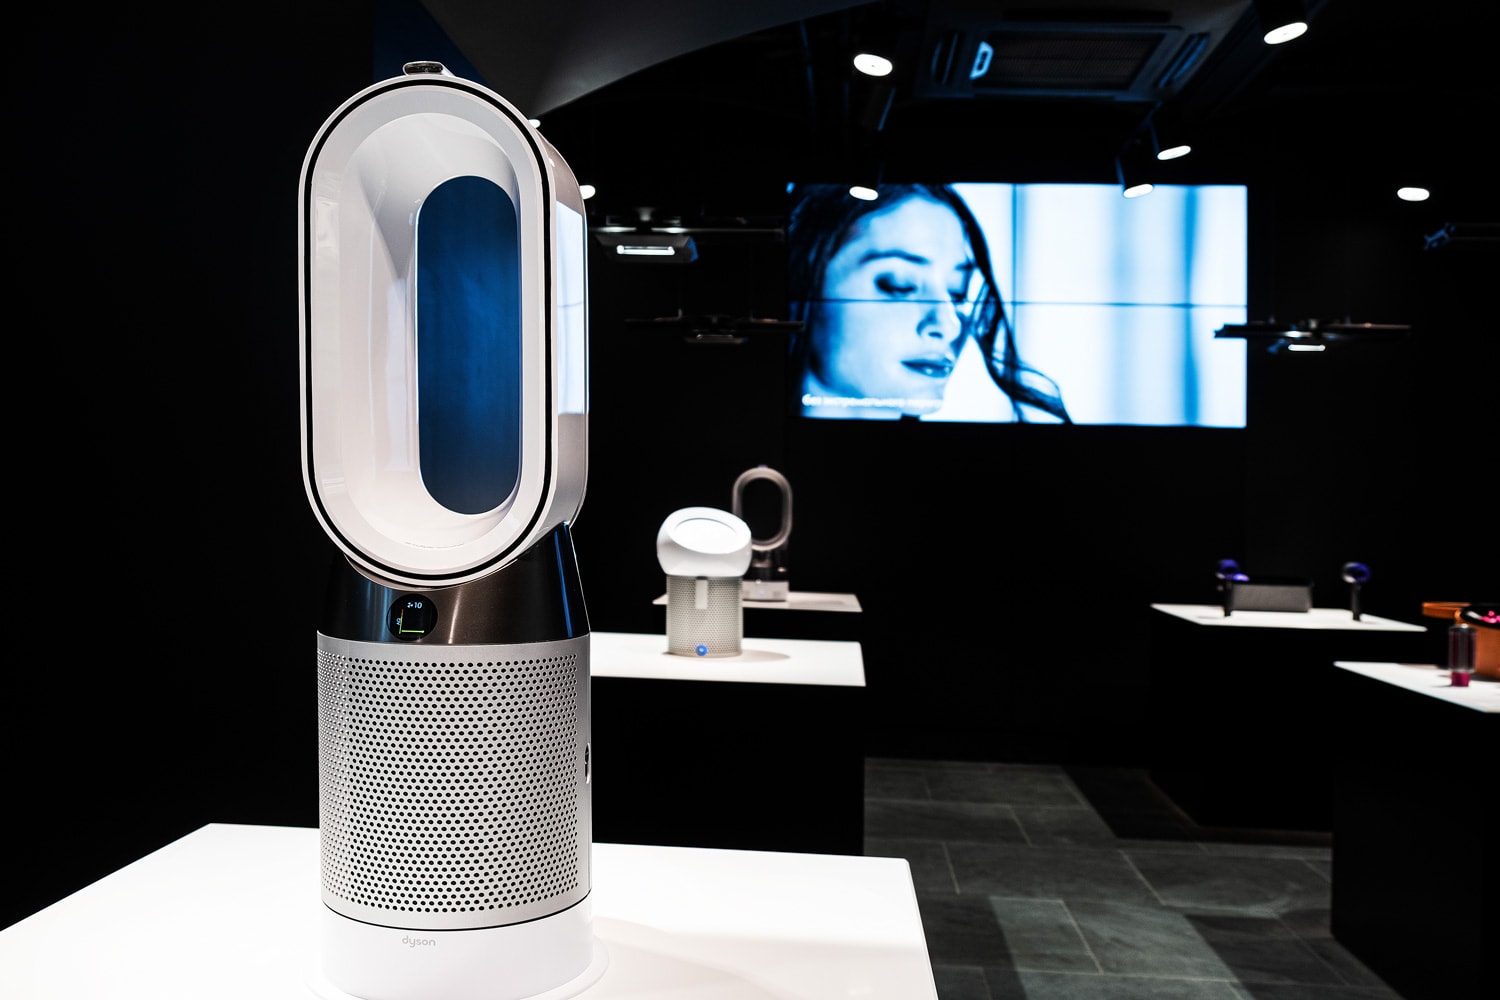 Showroom Brand Store Dyson. Modern Home Appliances And Beauty Tools Dyson.